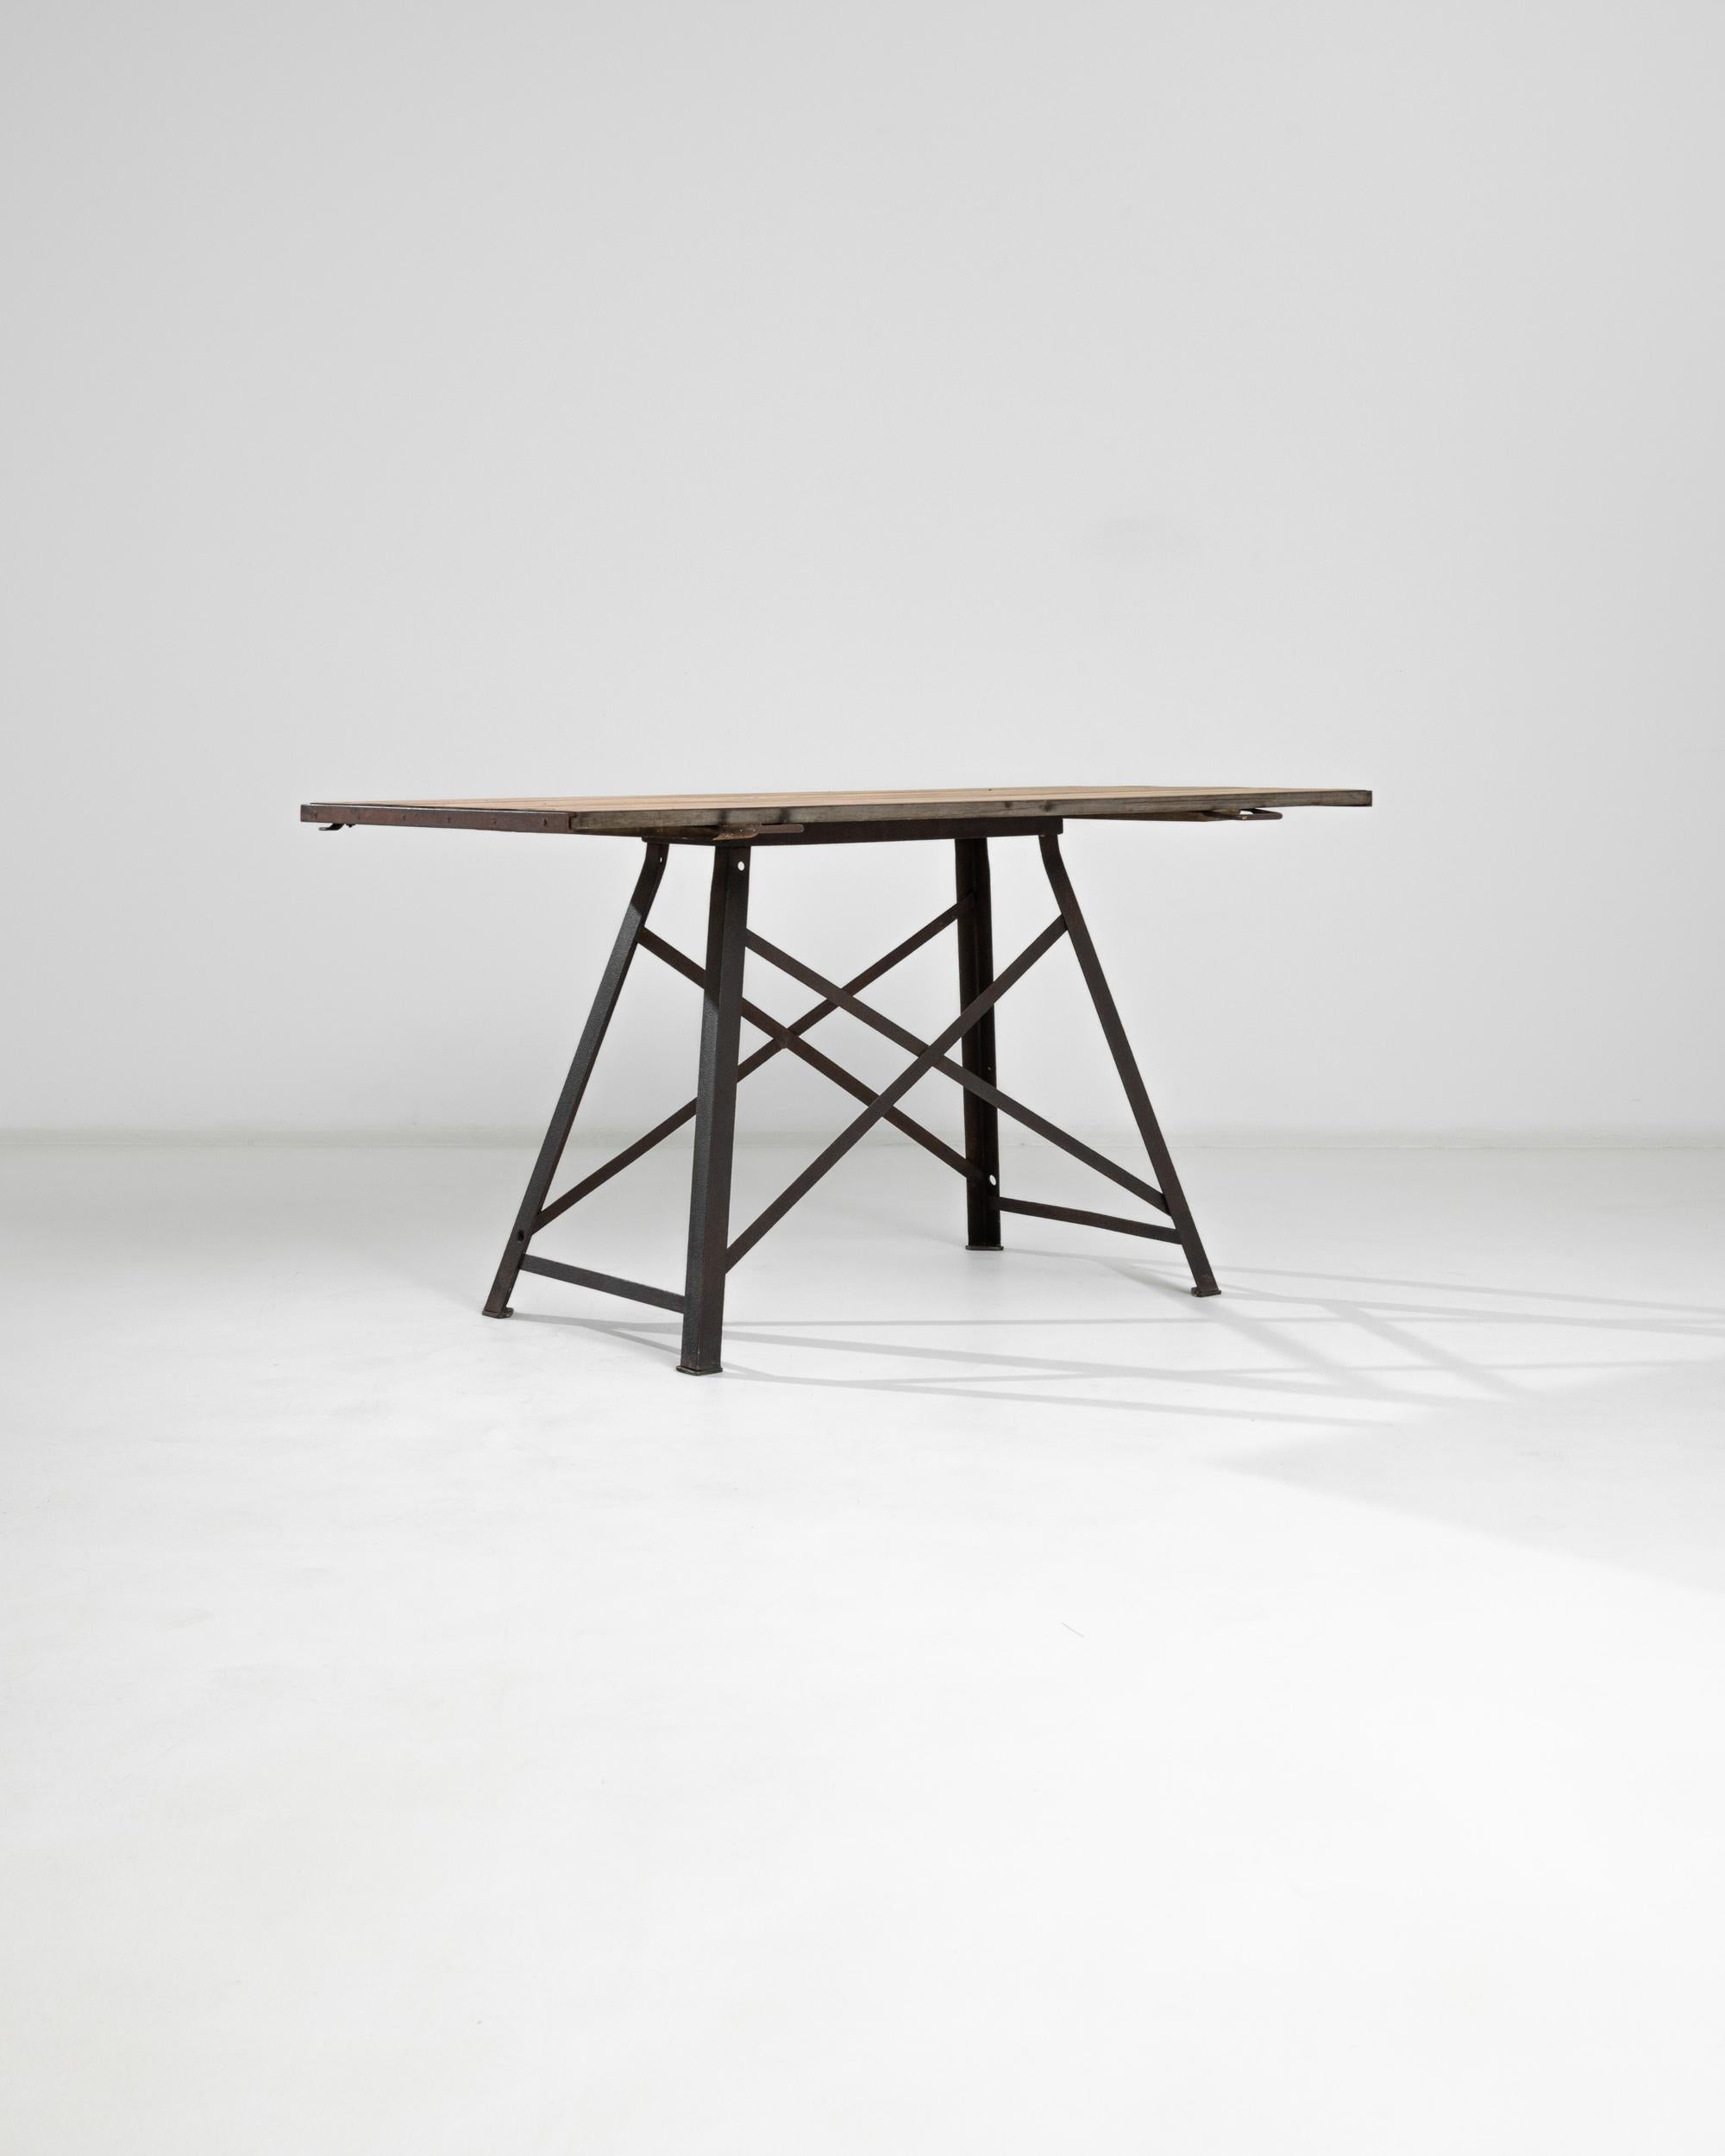 A table from 1920s France with a stylish, angular silhouette. The metal cross-bars of the trapezoid frame evoke the lattice of the Eiffel tower, lending a cosmopolitan inflection. Curved metal handles and riveted girders accent the tabletop,